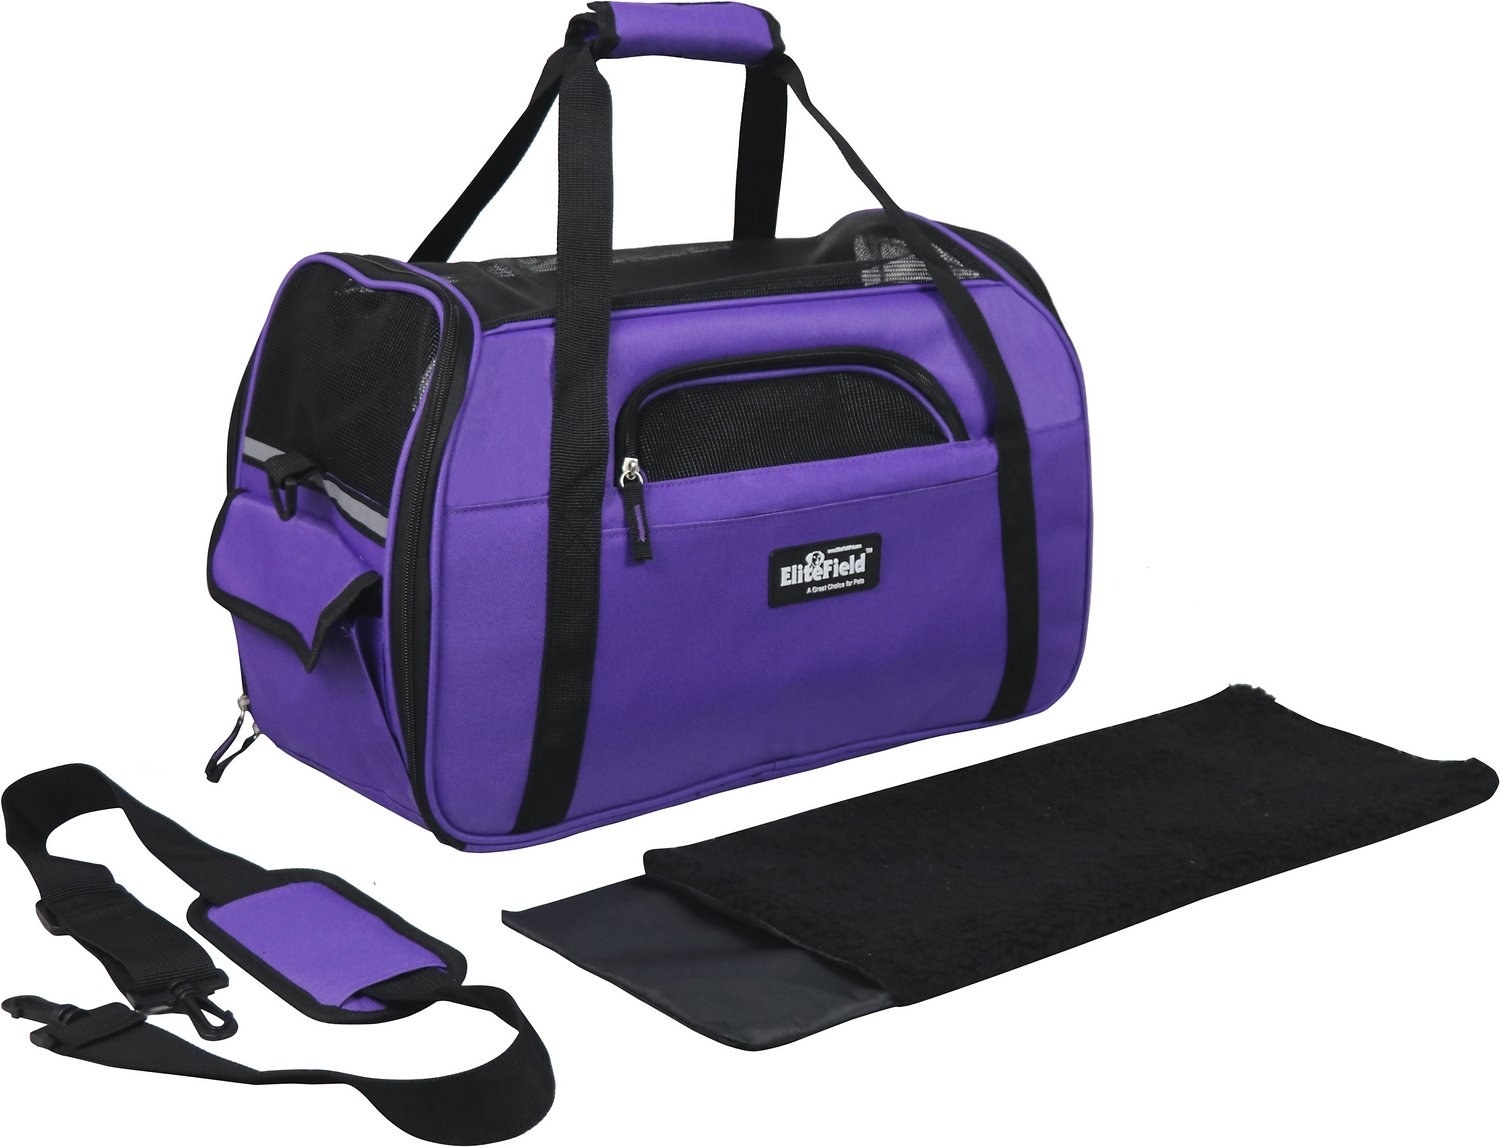 The purple soft-sided dog and cat carrier bag